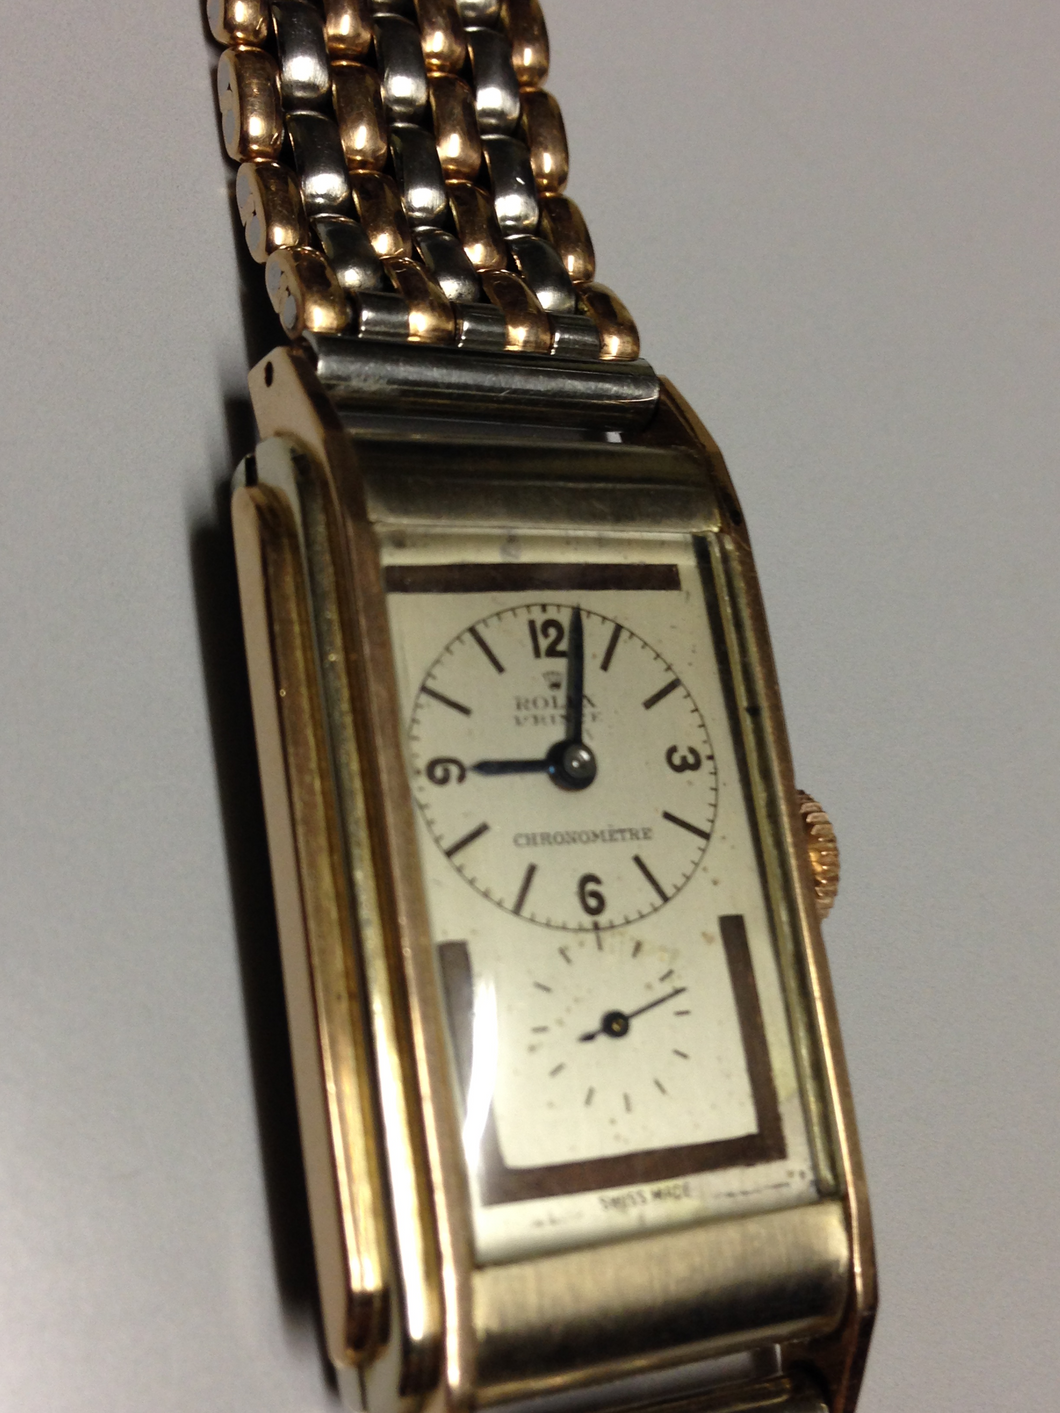 Rolex Prince Chronometer Ref: 1527 in White and Pink gold 14kt. Circa: 1935.